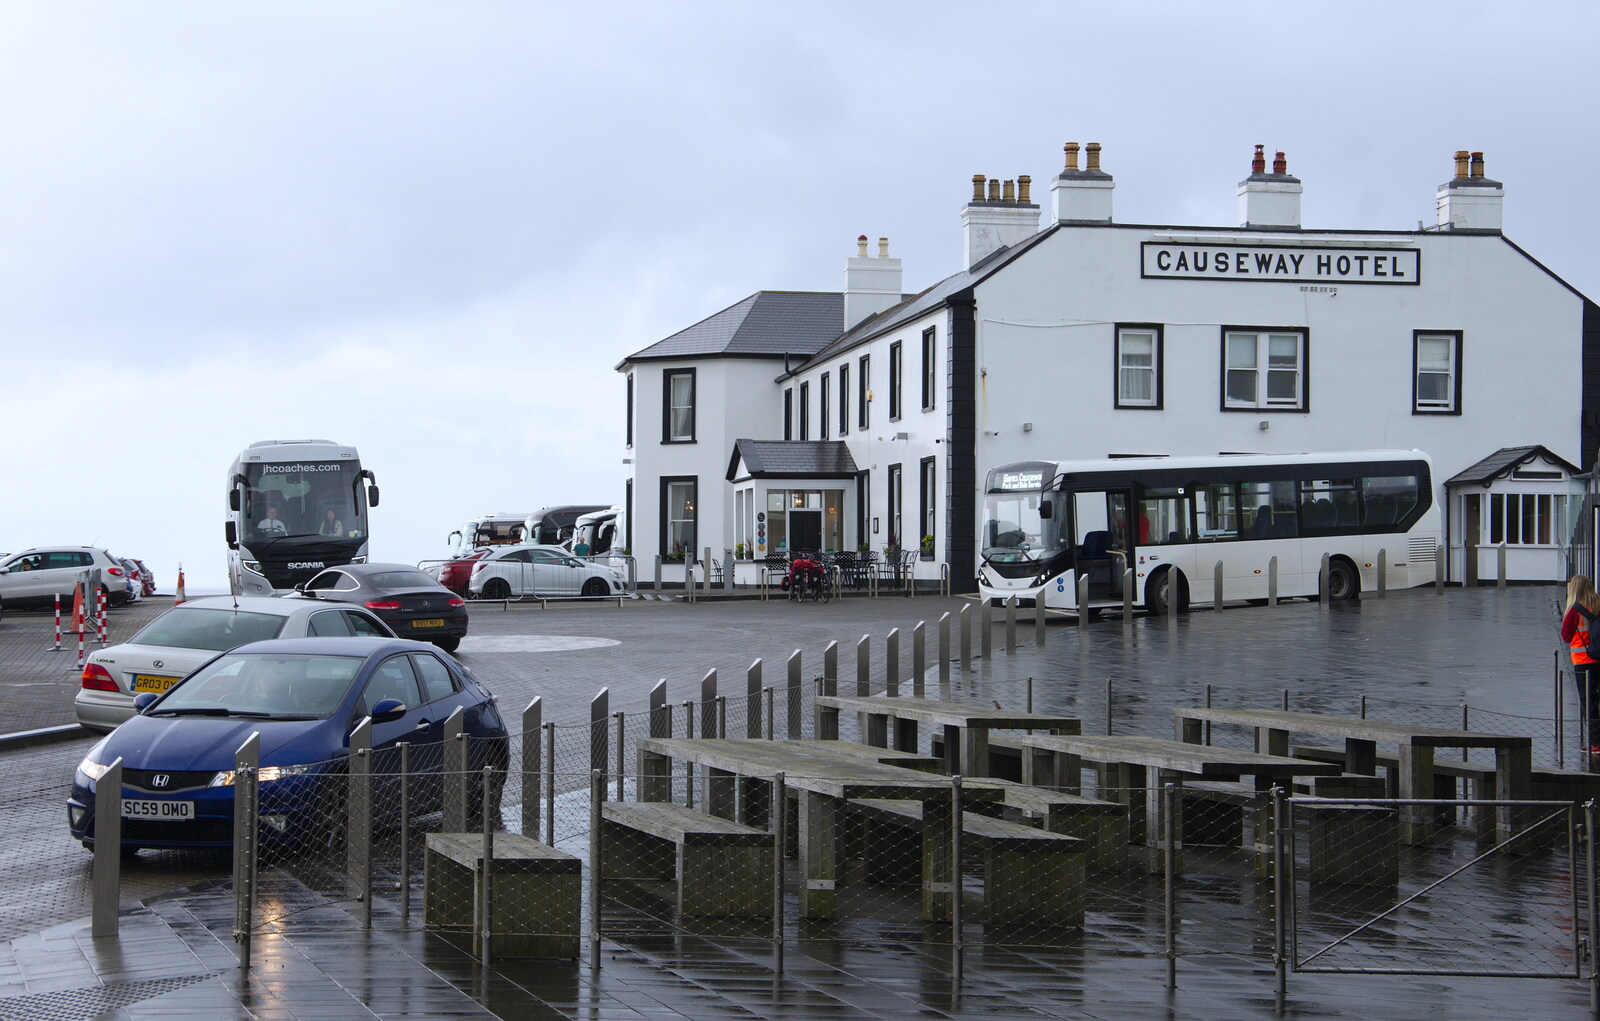 The Causeway Hotel in the rain from The Giant's Causeway, Bushmills, County Antrim, Northern Ireland - 14th August 2019